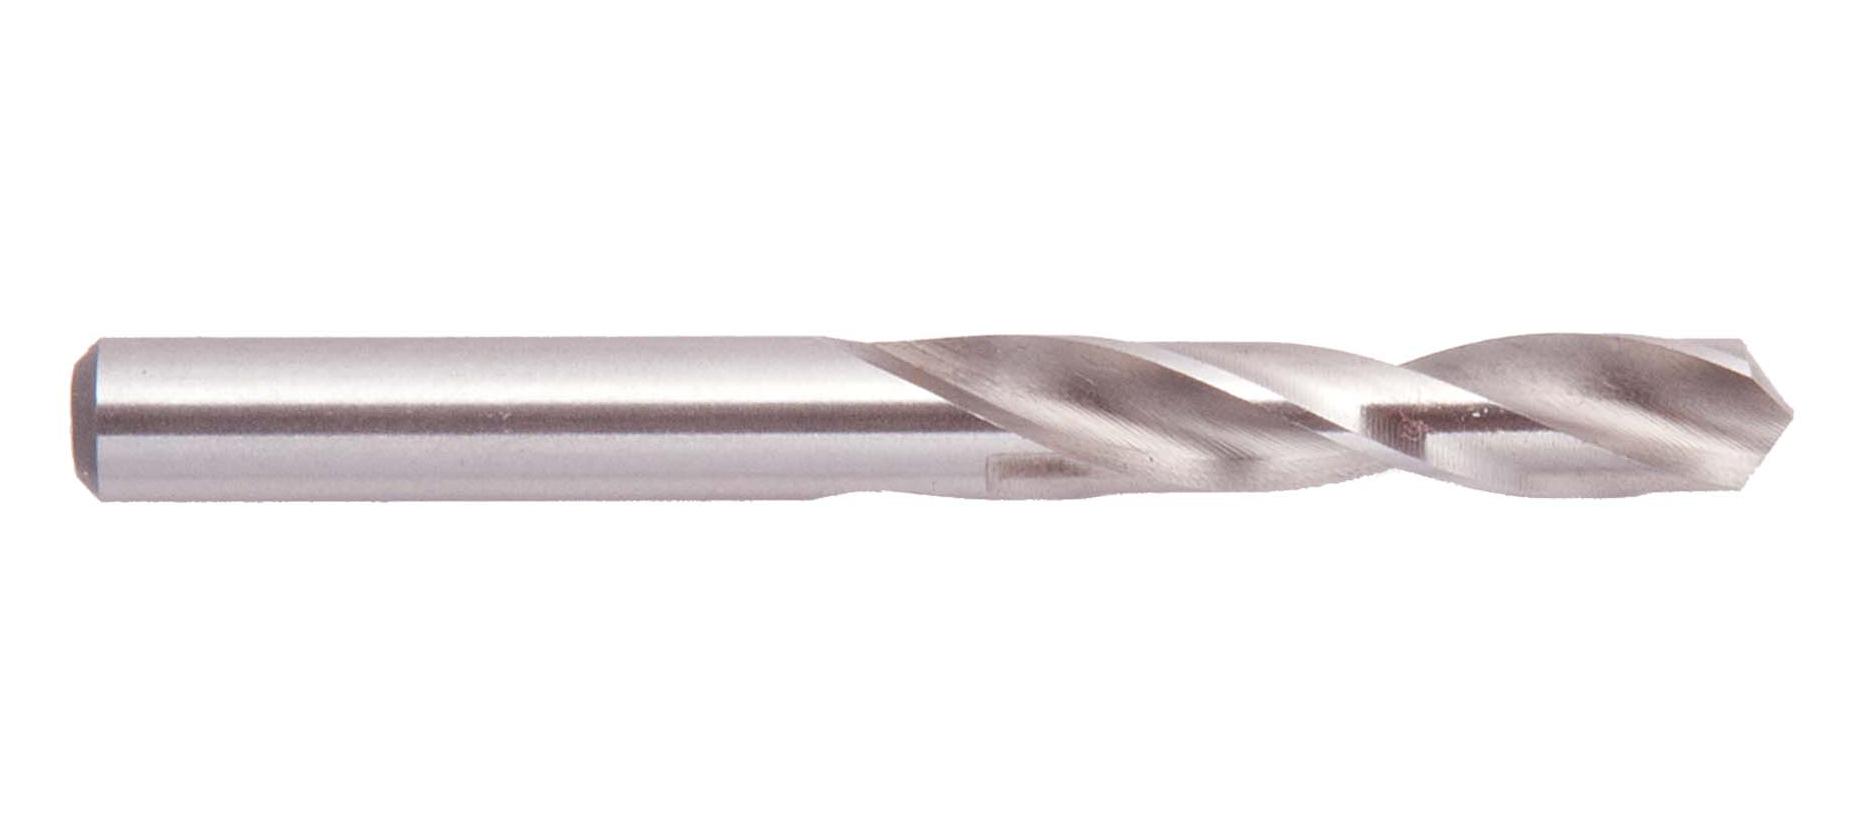 118 degree Point High-Speed Steel 11//32 Size Bright Finish Pack of 12 Morse Cutting Tools 80968 Series 435 Screw Machine Length Drills